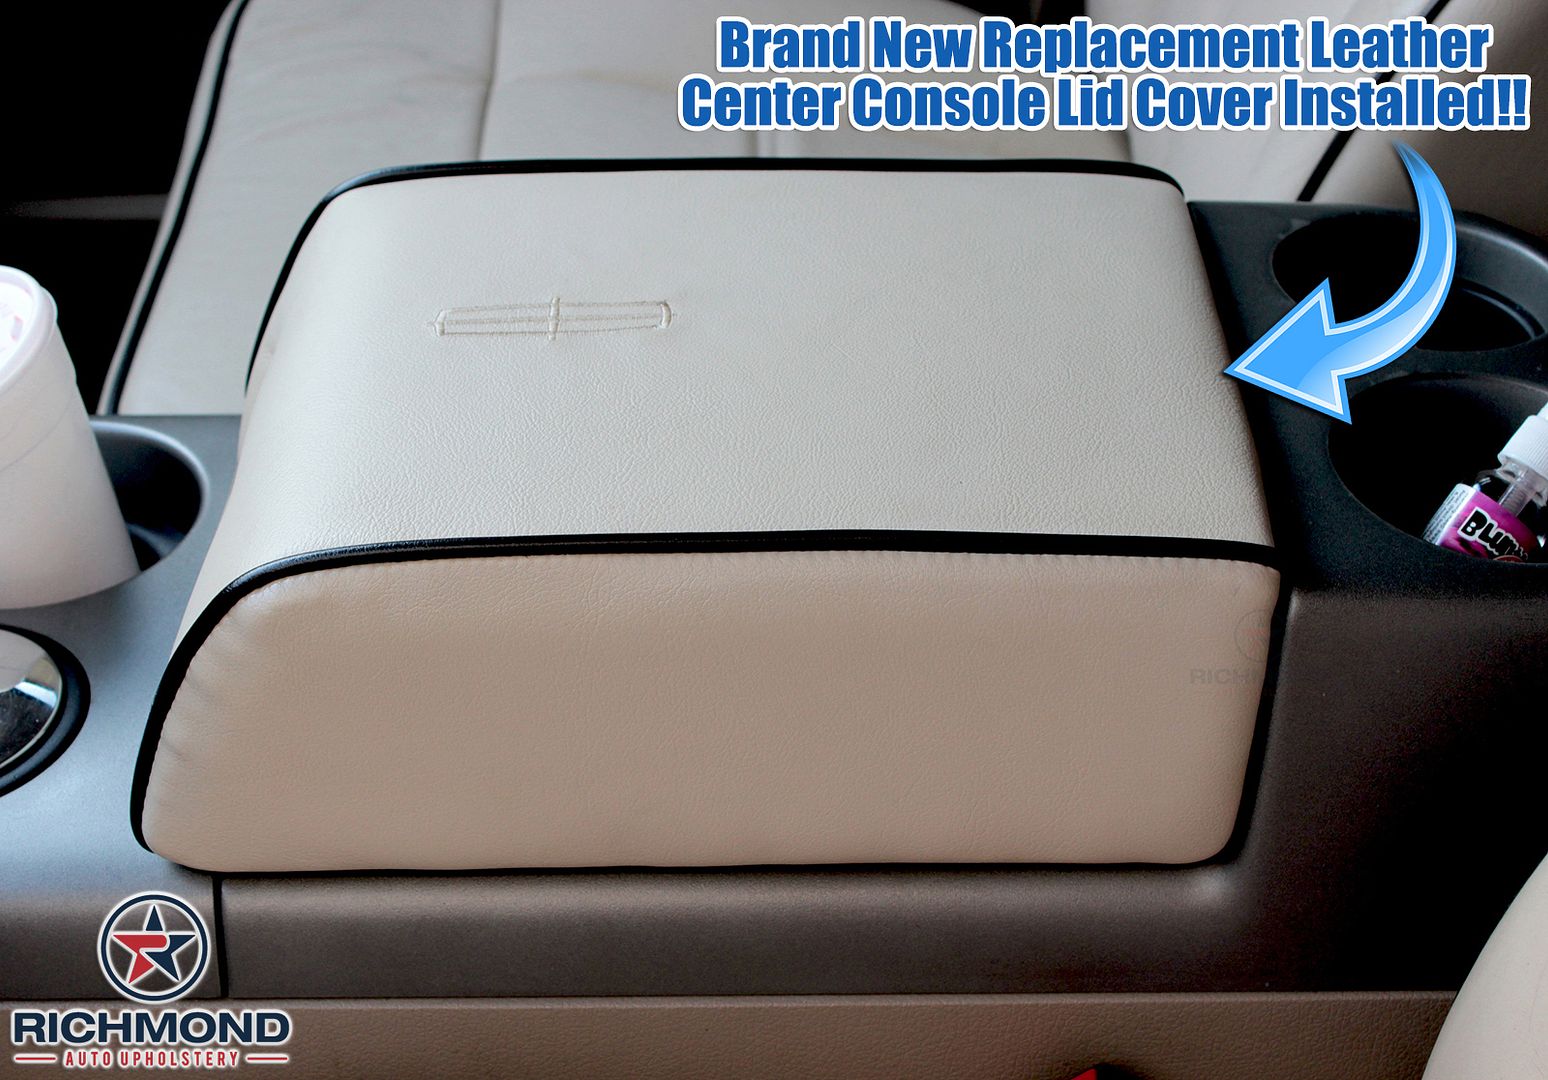  photo 2006-Lincoln-Mark-LT-Logo-Center-Console-Storage-Compartment-Lid-Leather-Cover-installed-1_zps9bmzlp67.jpg